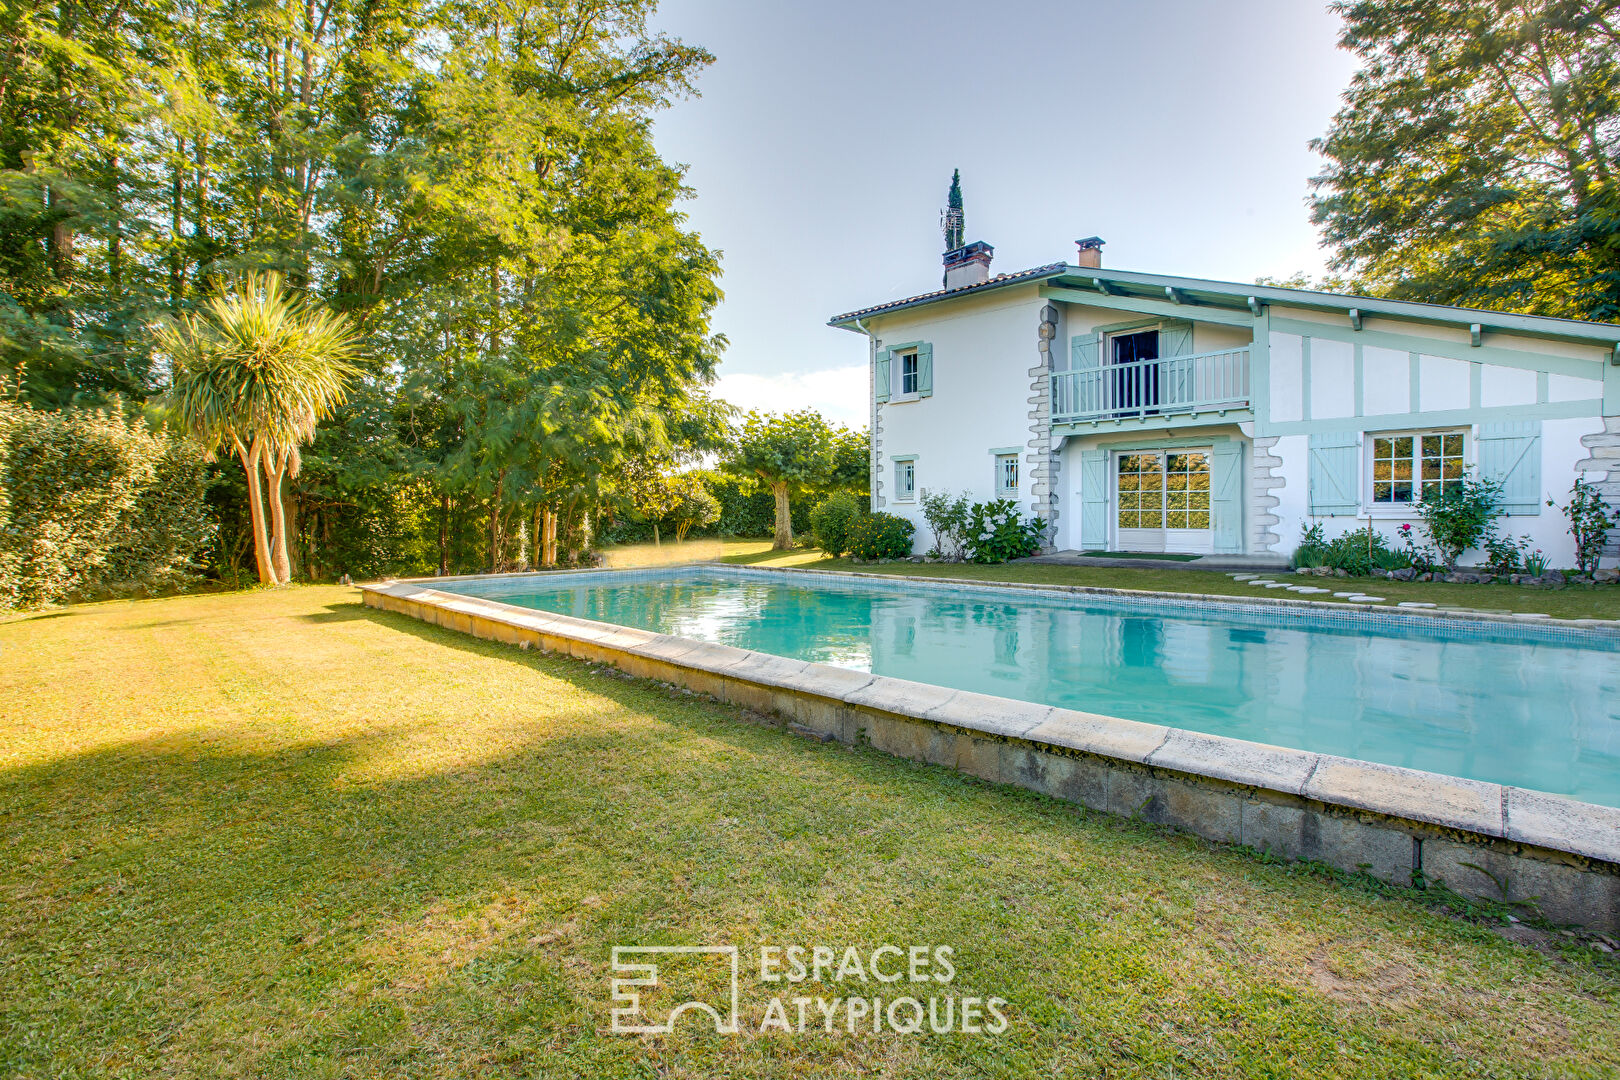 Landes house with swimming pool in a village in the Pays d’Orthe